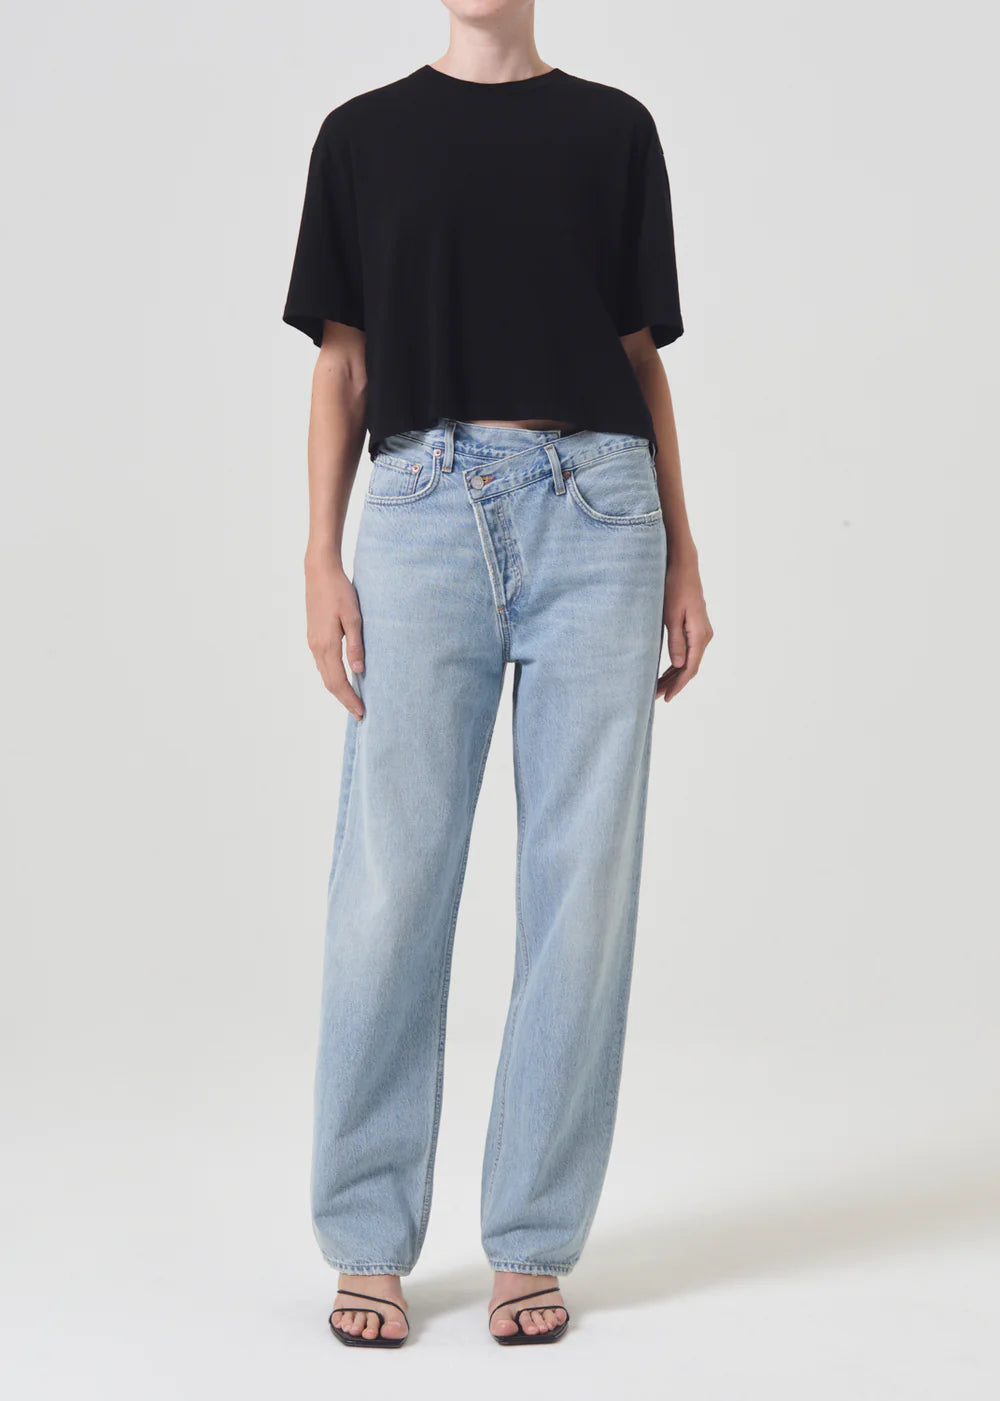 Criss Cross Jeans in Wired